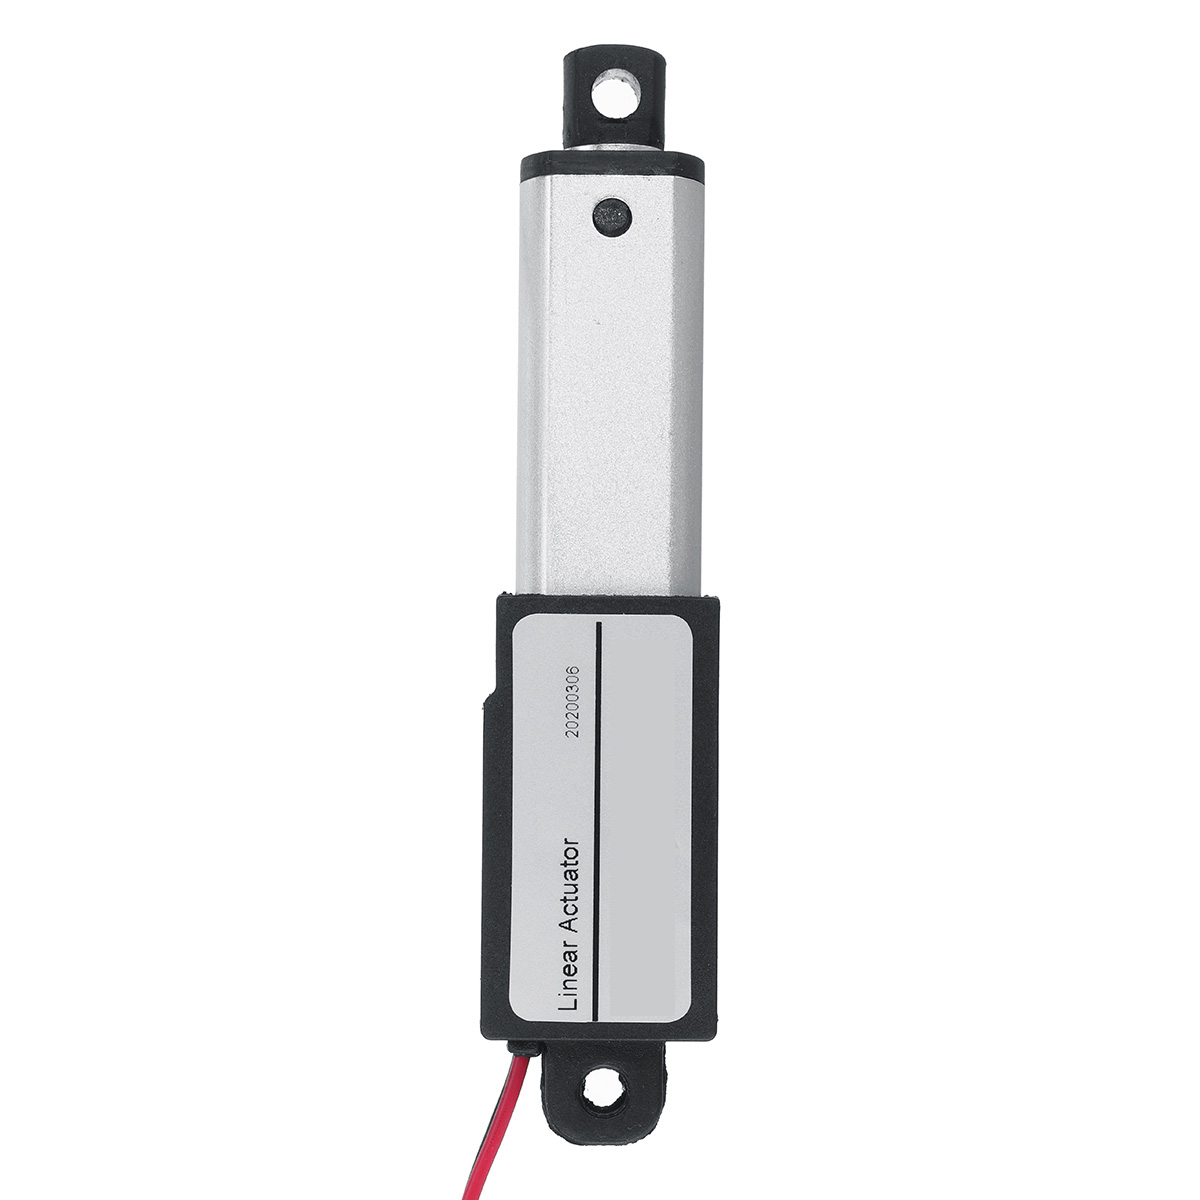 30mm/s 15mm/s 9.5mm/s Aluminum Alloy 5000N 100mm Stroke Micro Linear Actuators Linear Actuator DC 12V Electric Linear Motor